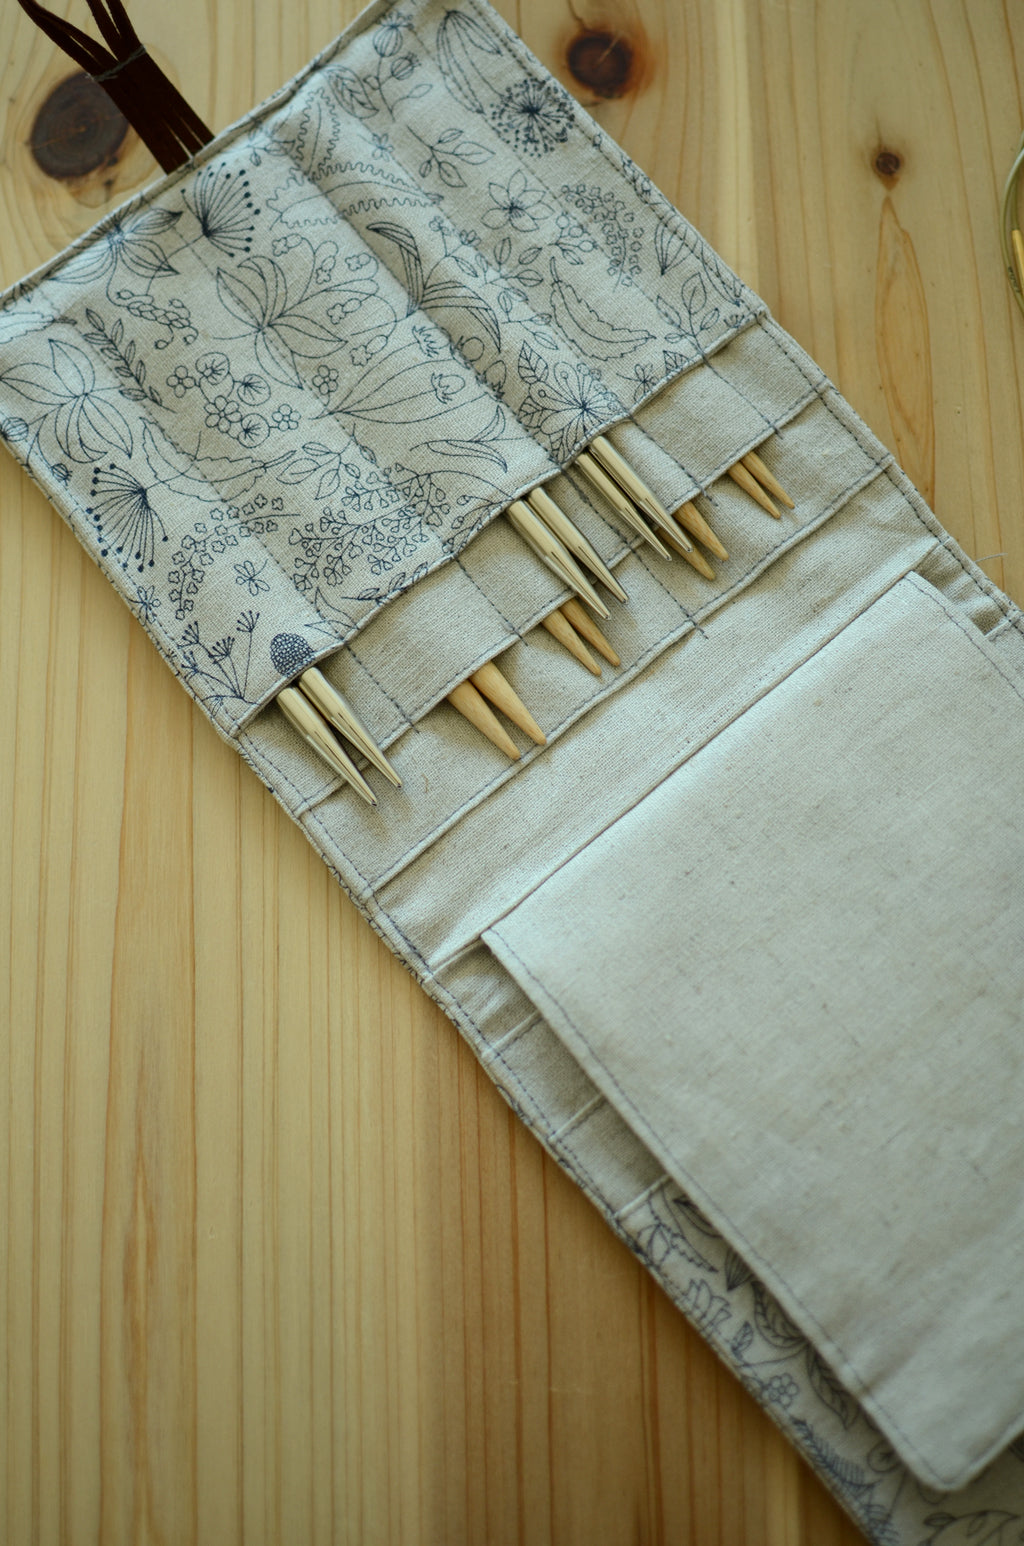 Everest: The Ultimate Knitting Needle Organizer — VERY SHANNON